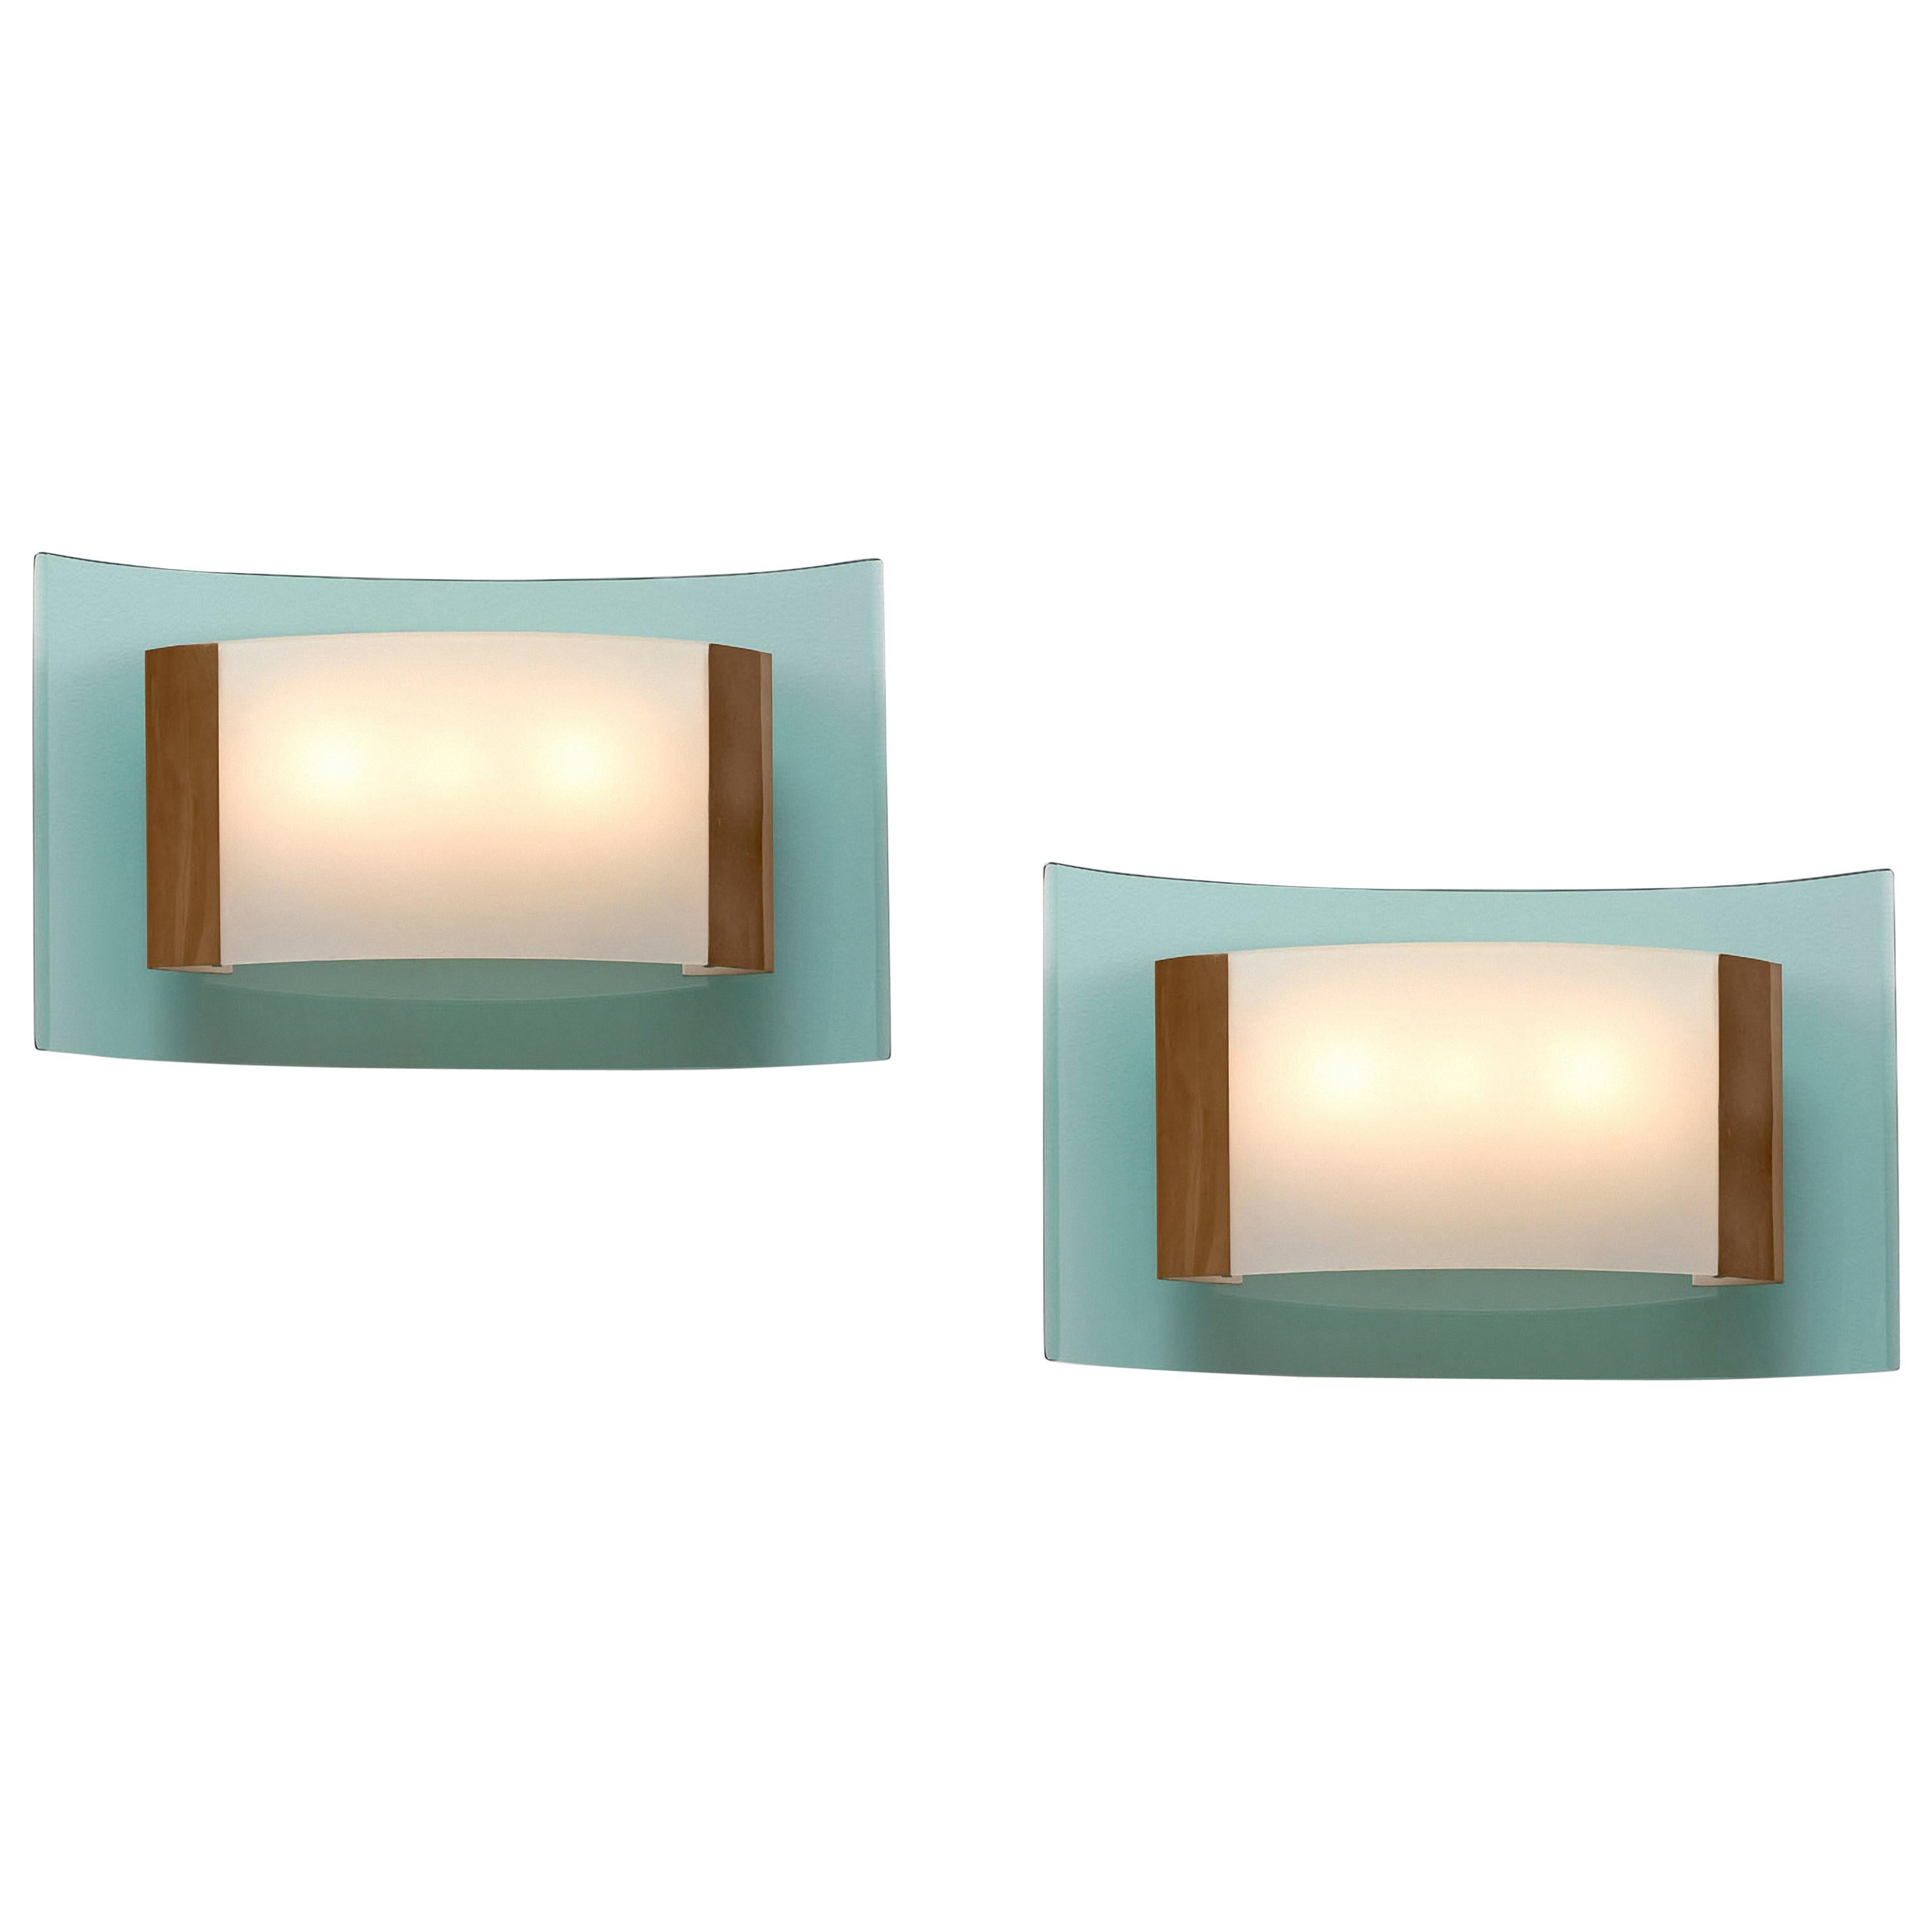 Max Ingrand Rare Pair of Modernist Sconces Model 2213 in Glass and Brass